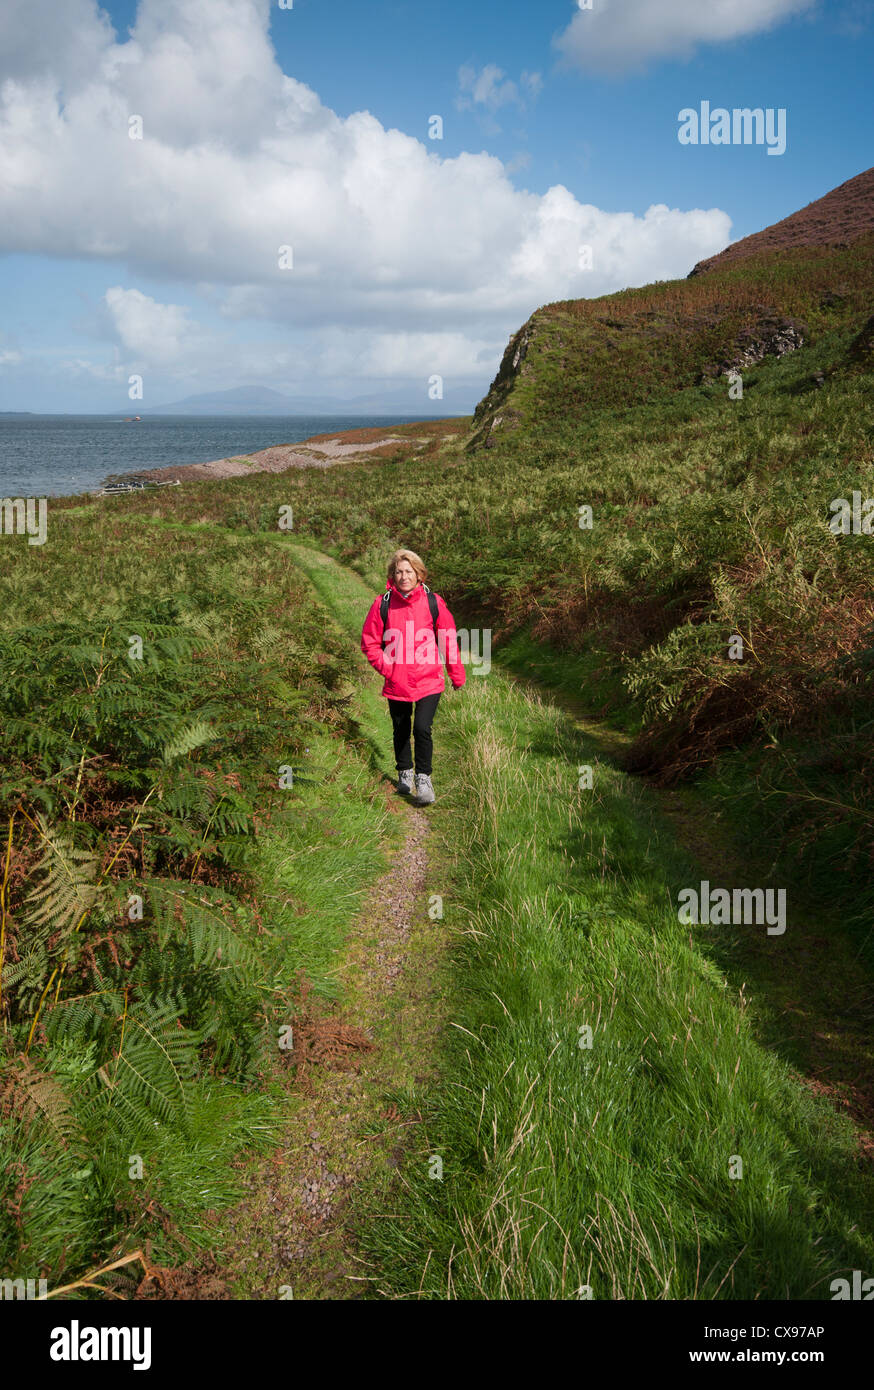 Front View Of A Woman Person Walking Through The Countryside Wearing Waterproof Clothing and A Rucksack Stock Photo